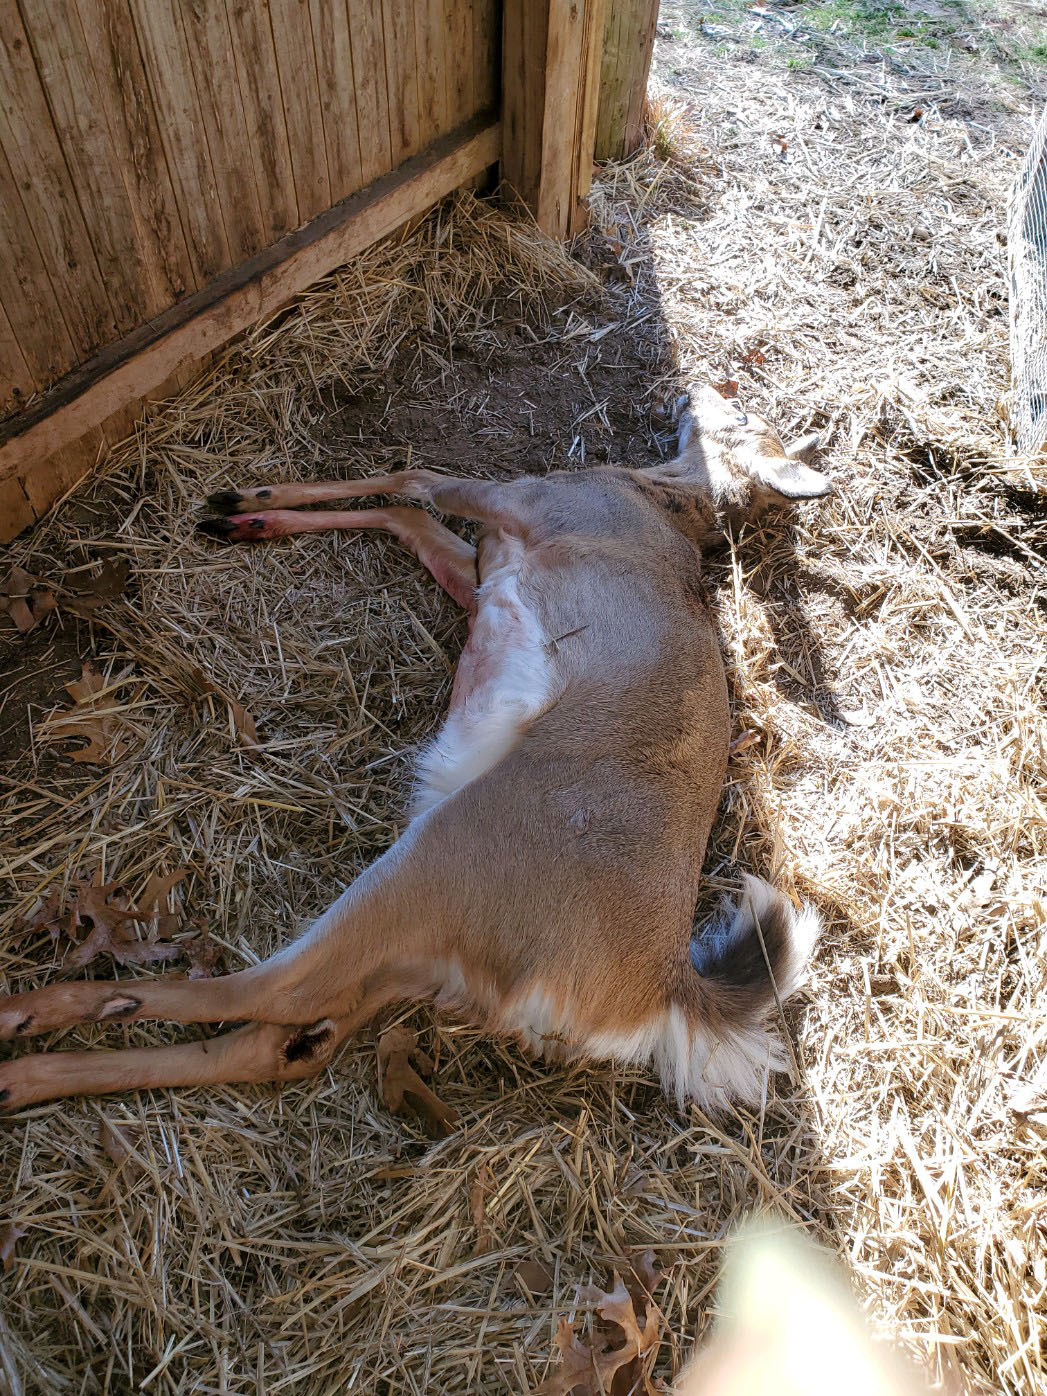 The fatally wounded deer.   COURTESY GINNIE FRATI